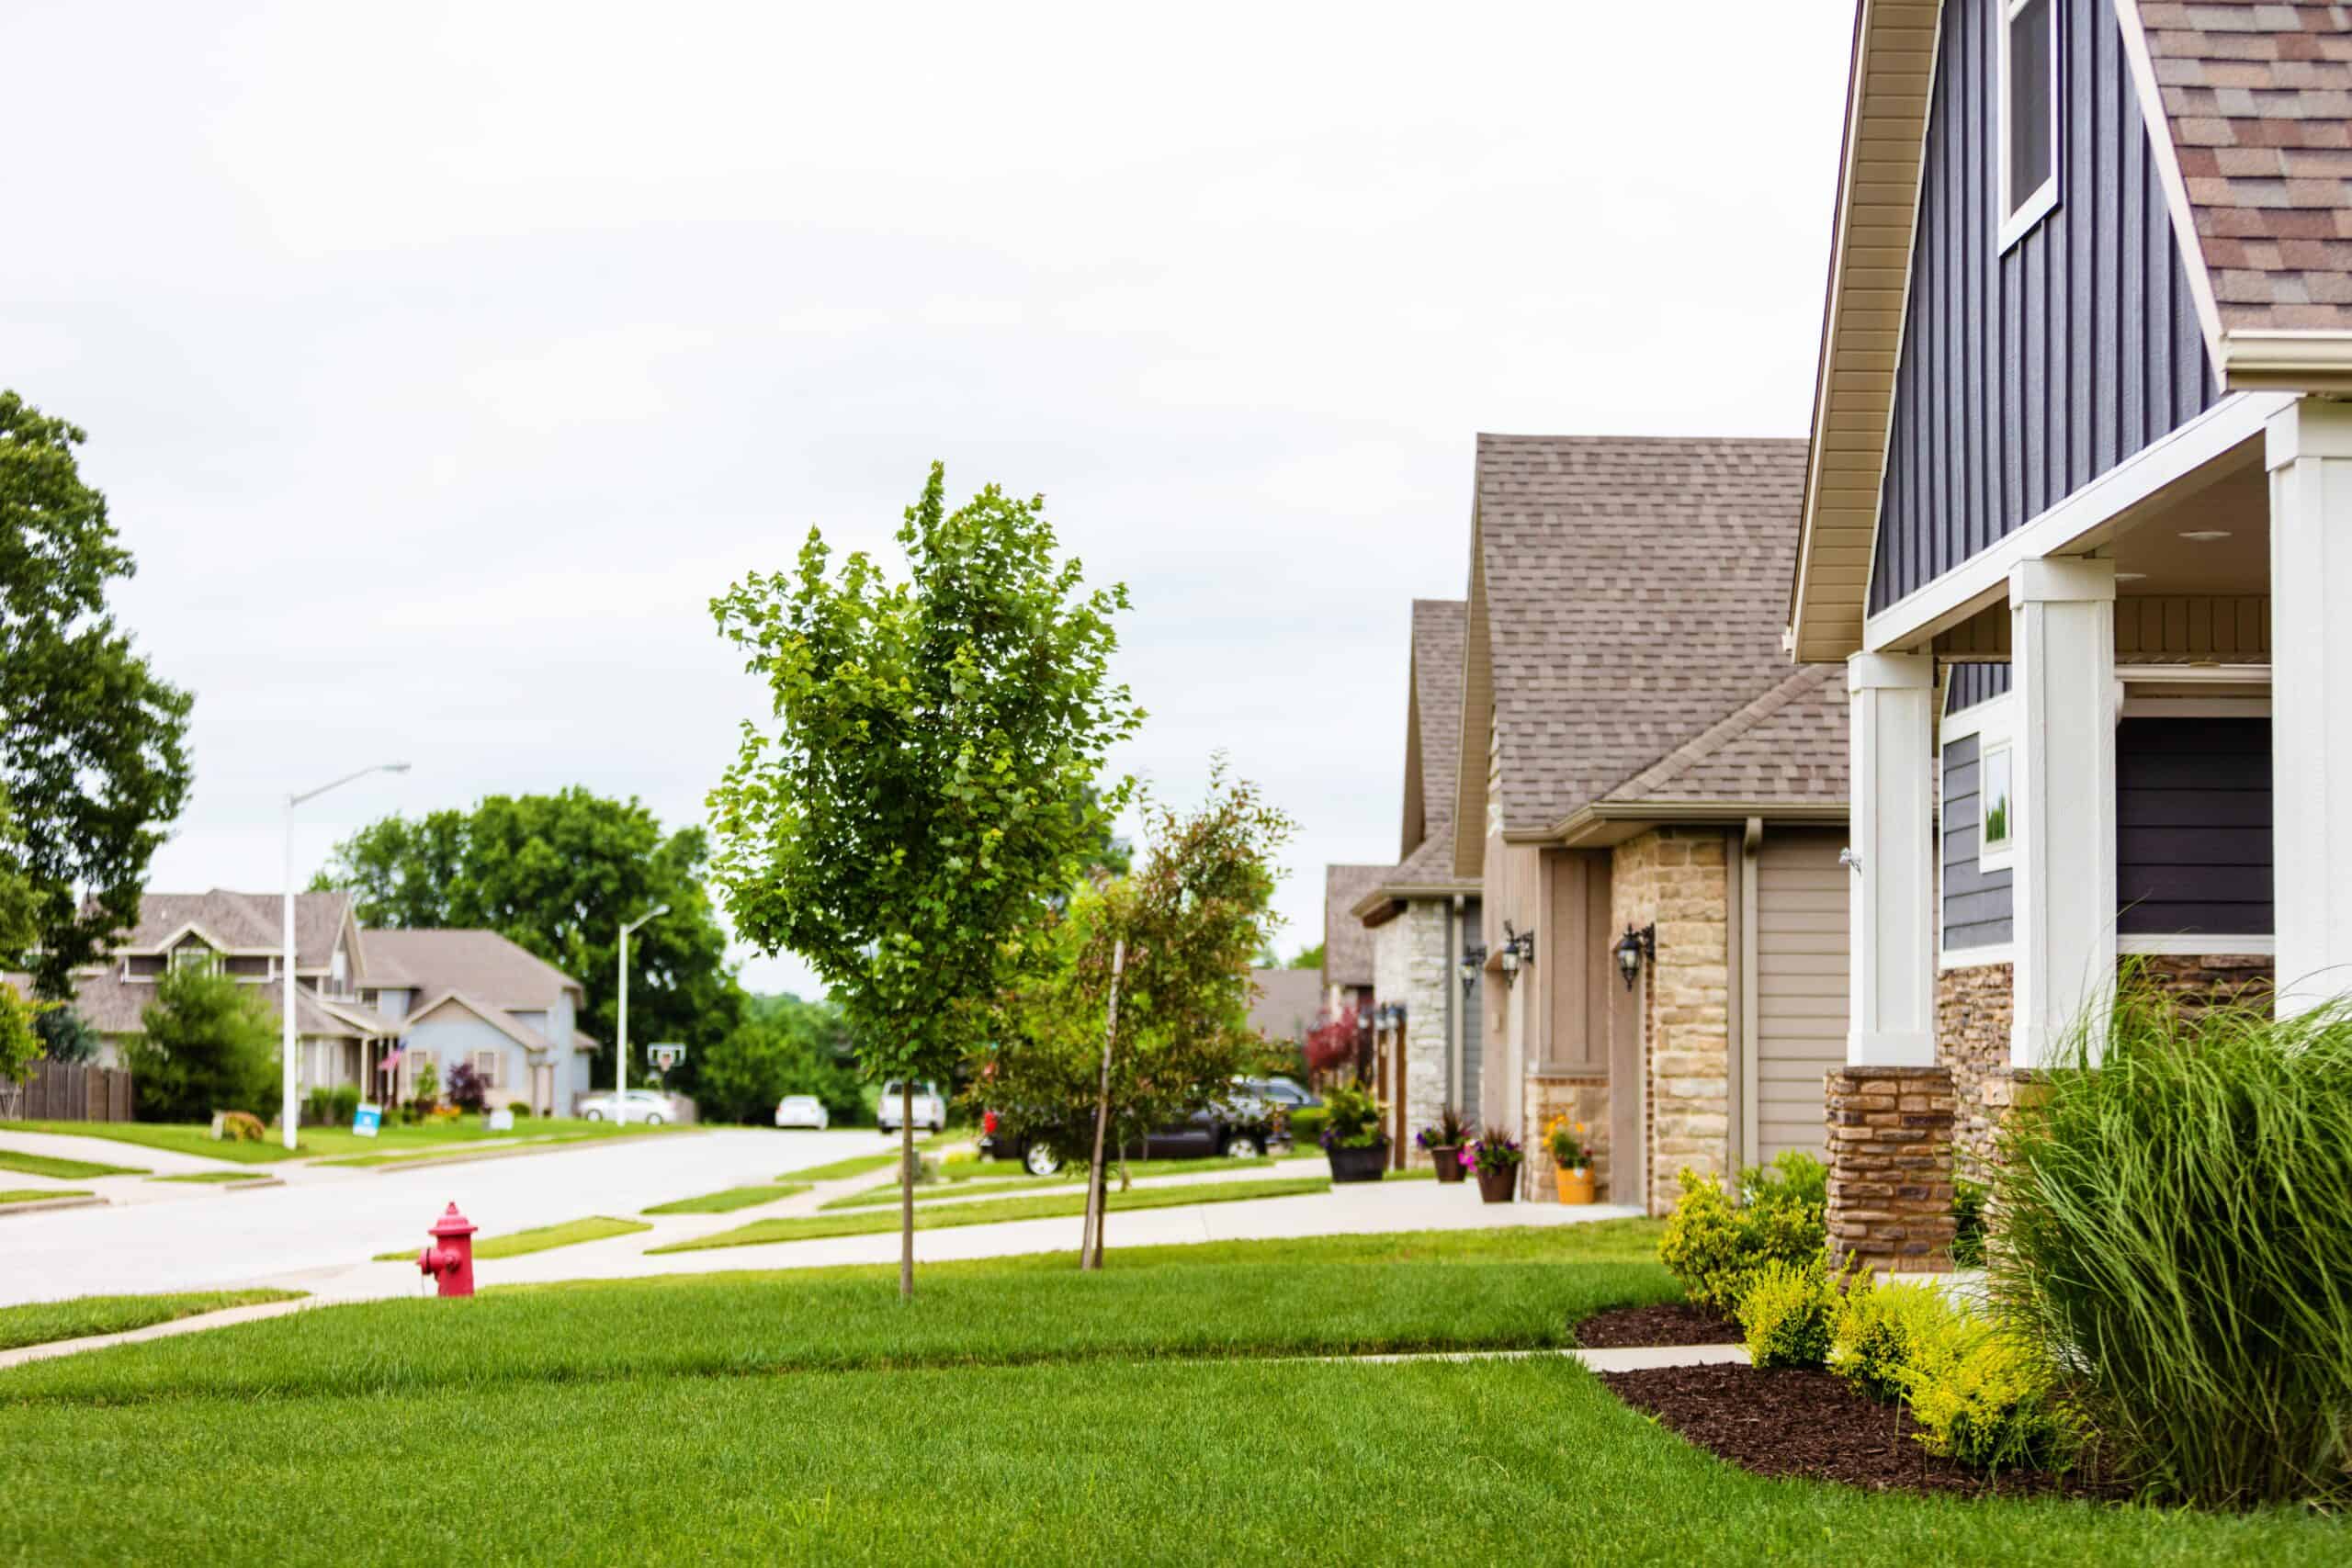 residential Missouri | Groups of Homes with Healthy Green Yards on a Sunny Summer Day